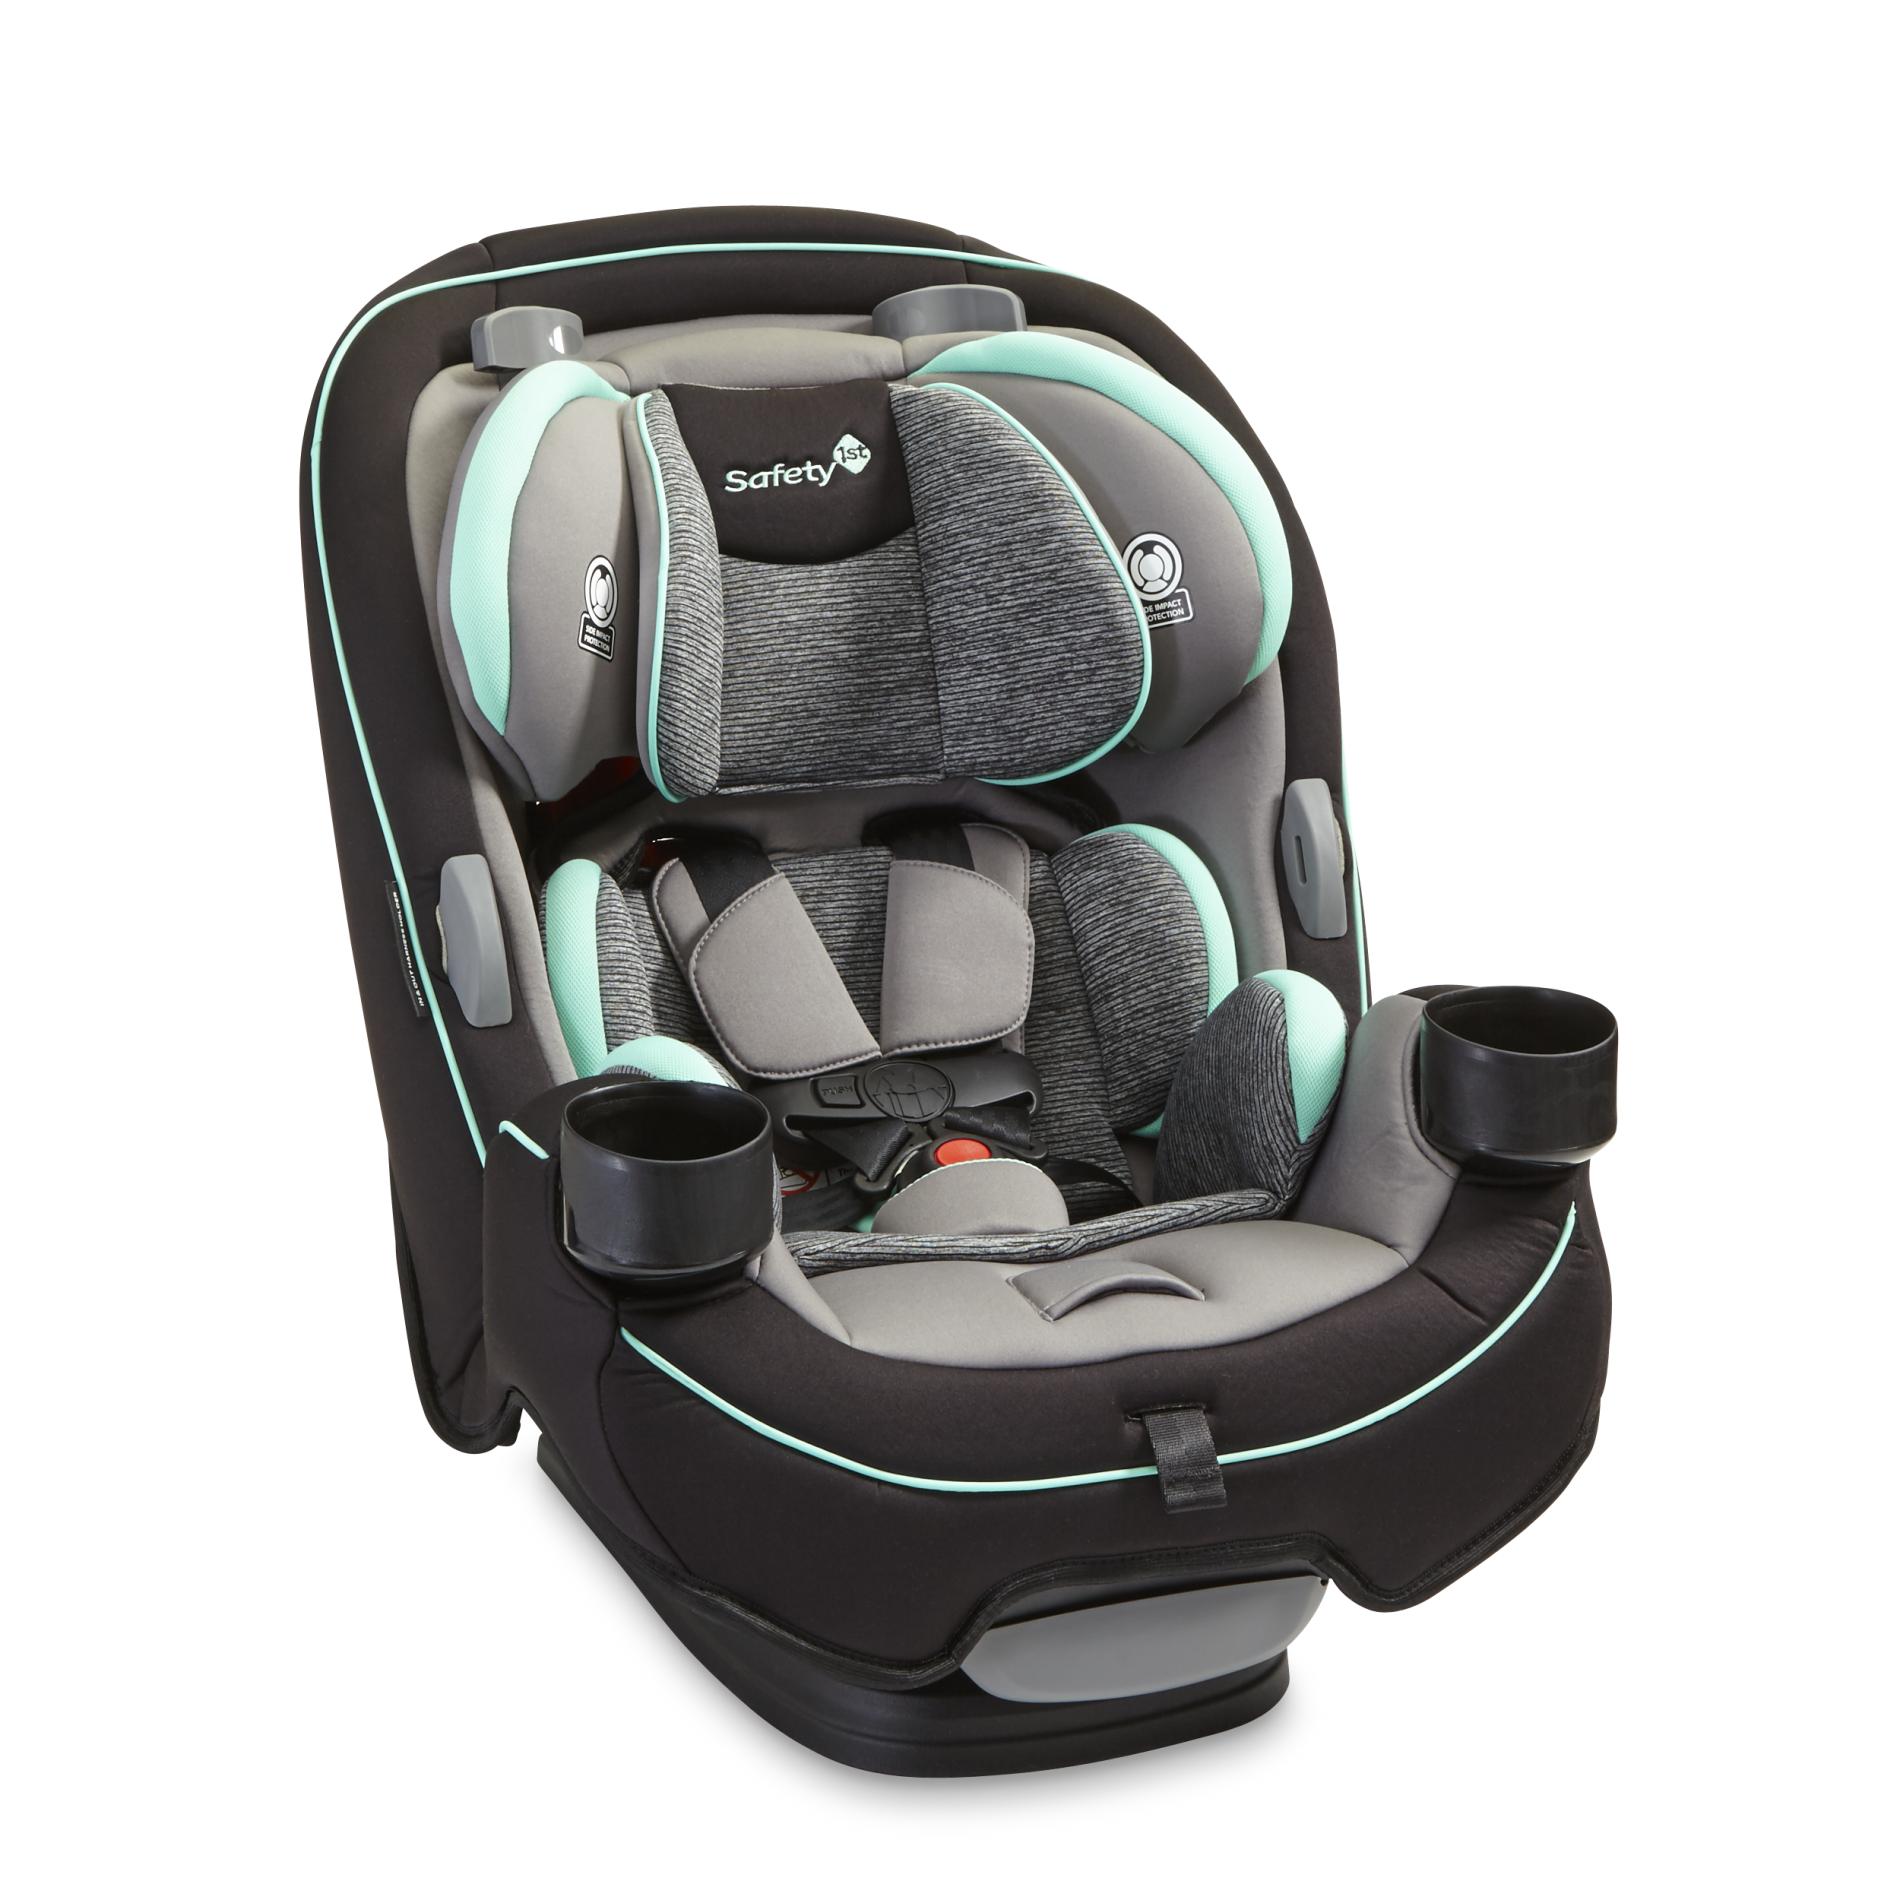 Convertible Car Seat, Safety 1st Grow And Go 3 In 1 Convertible Car Seat Rating